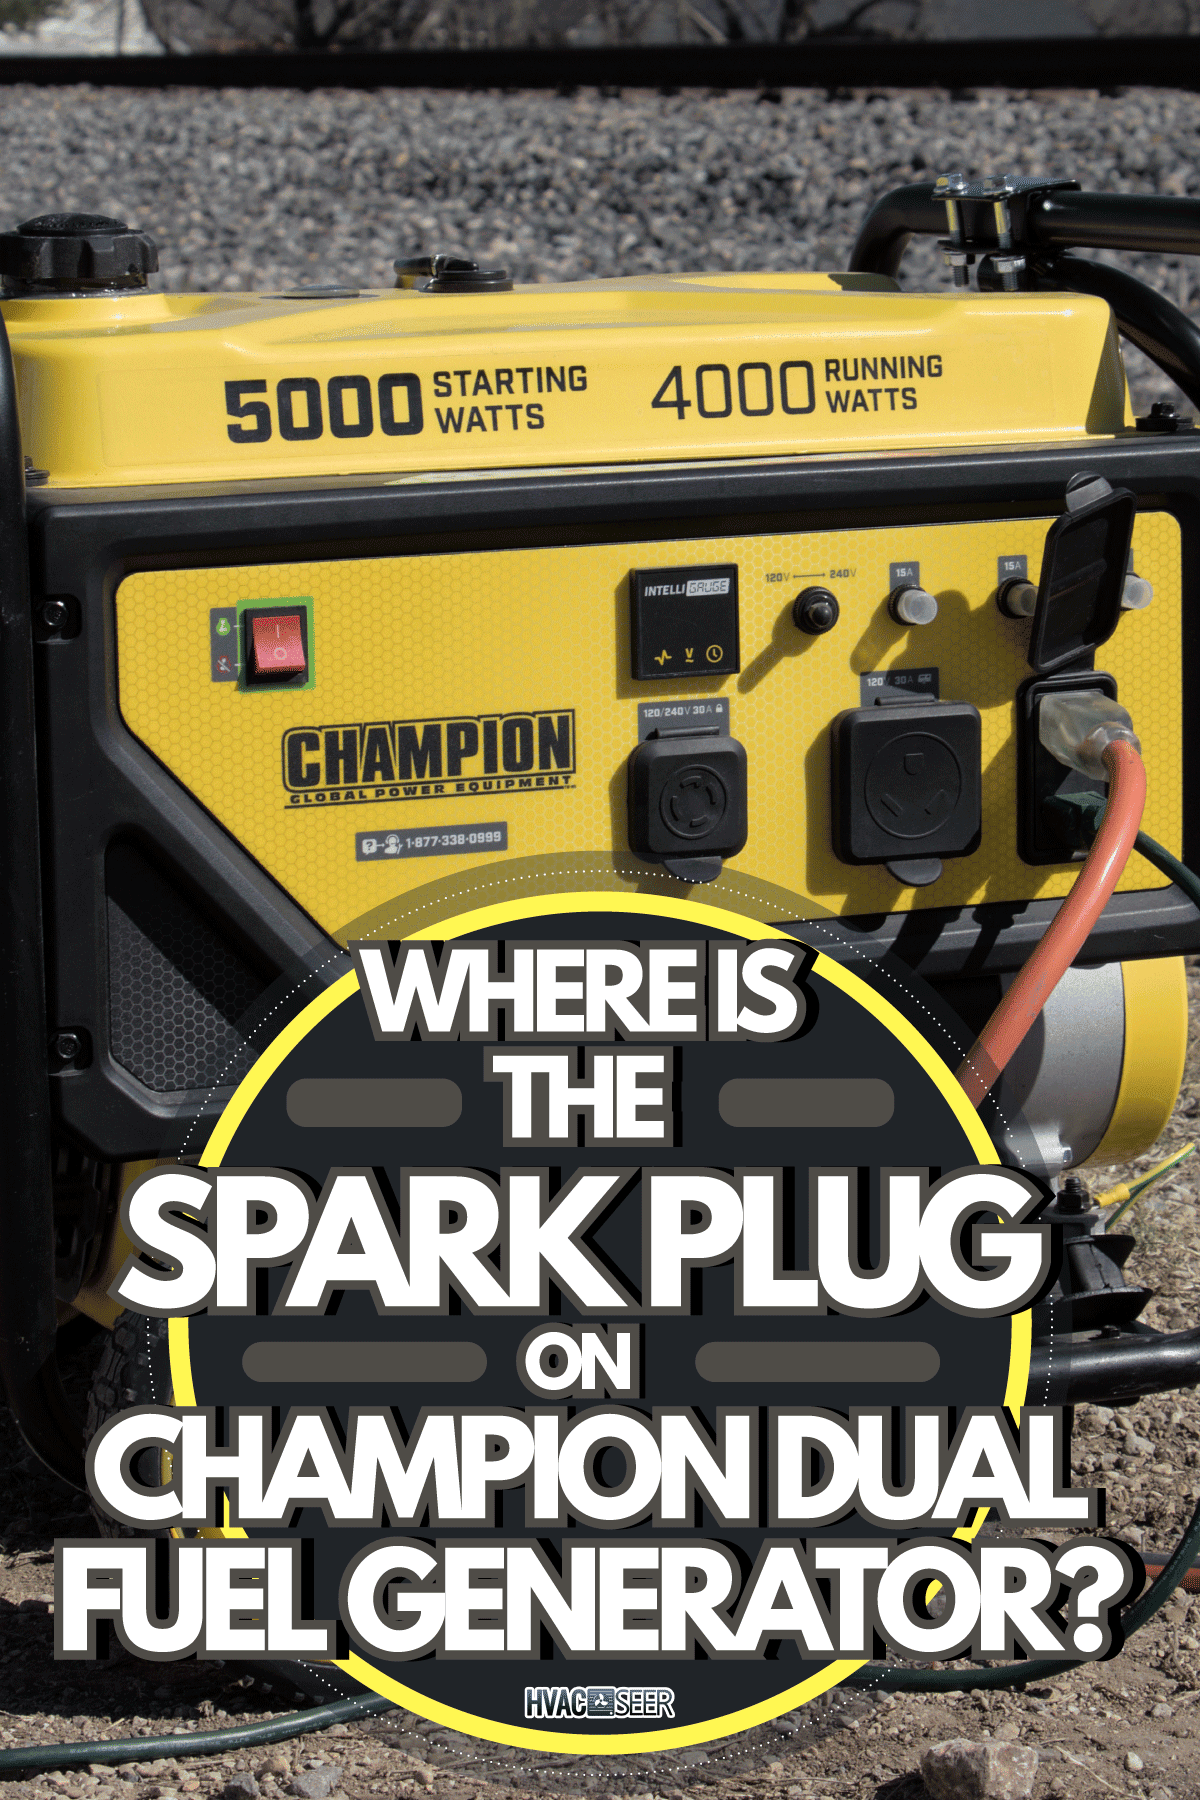 Spark plug replacement work, Where Is The Spark Plug On Champion Dual Fuel Generator?